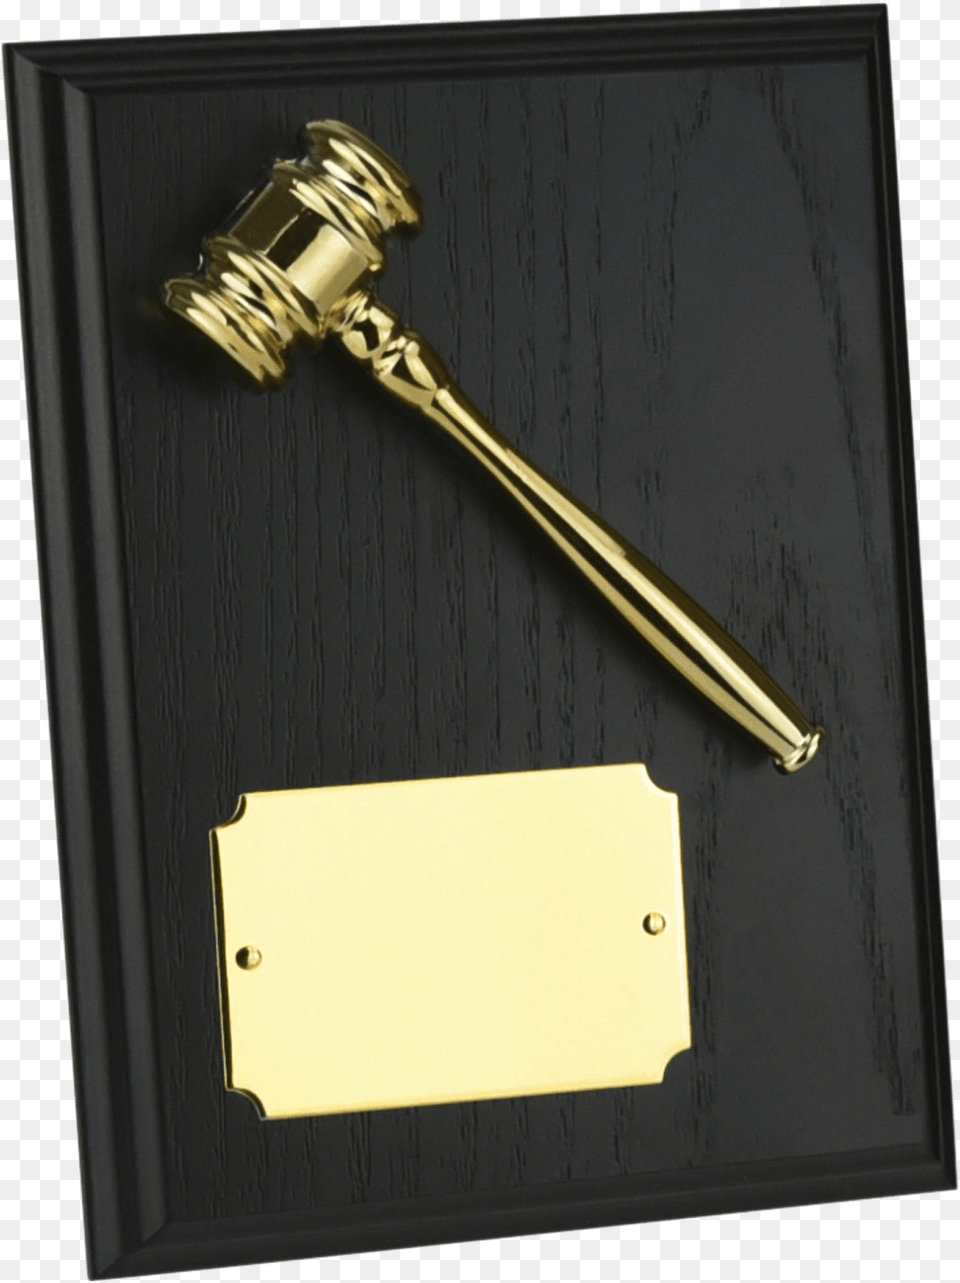 Gold U0026 Silver Gavel Plaque Award Hammer, Mace Club, Weapon, Device Png Image